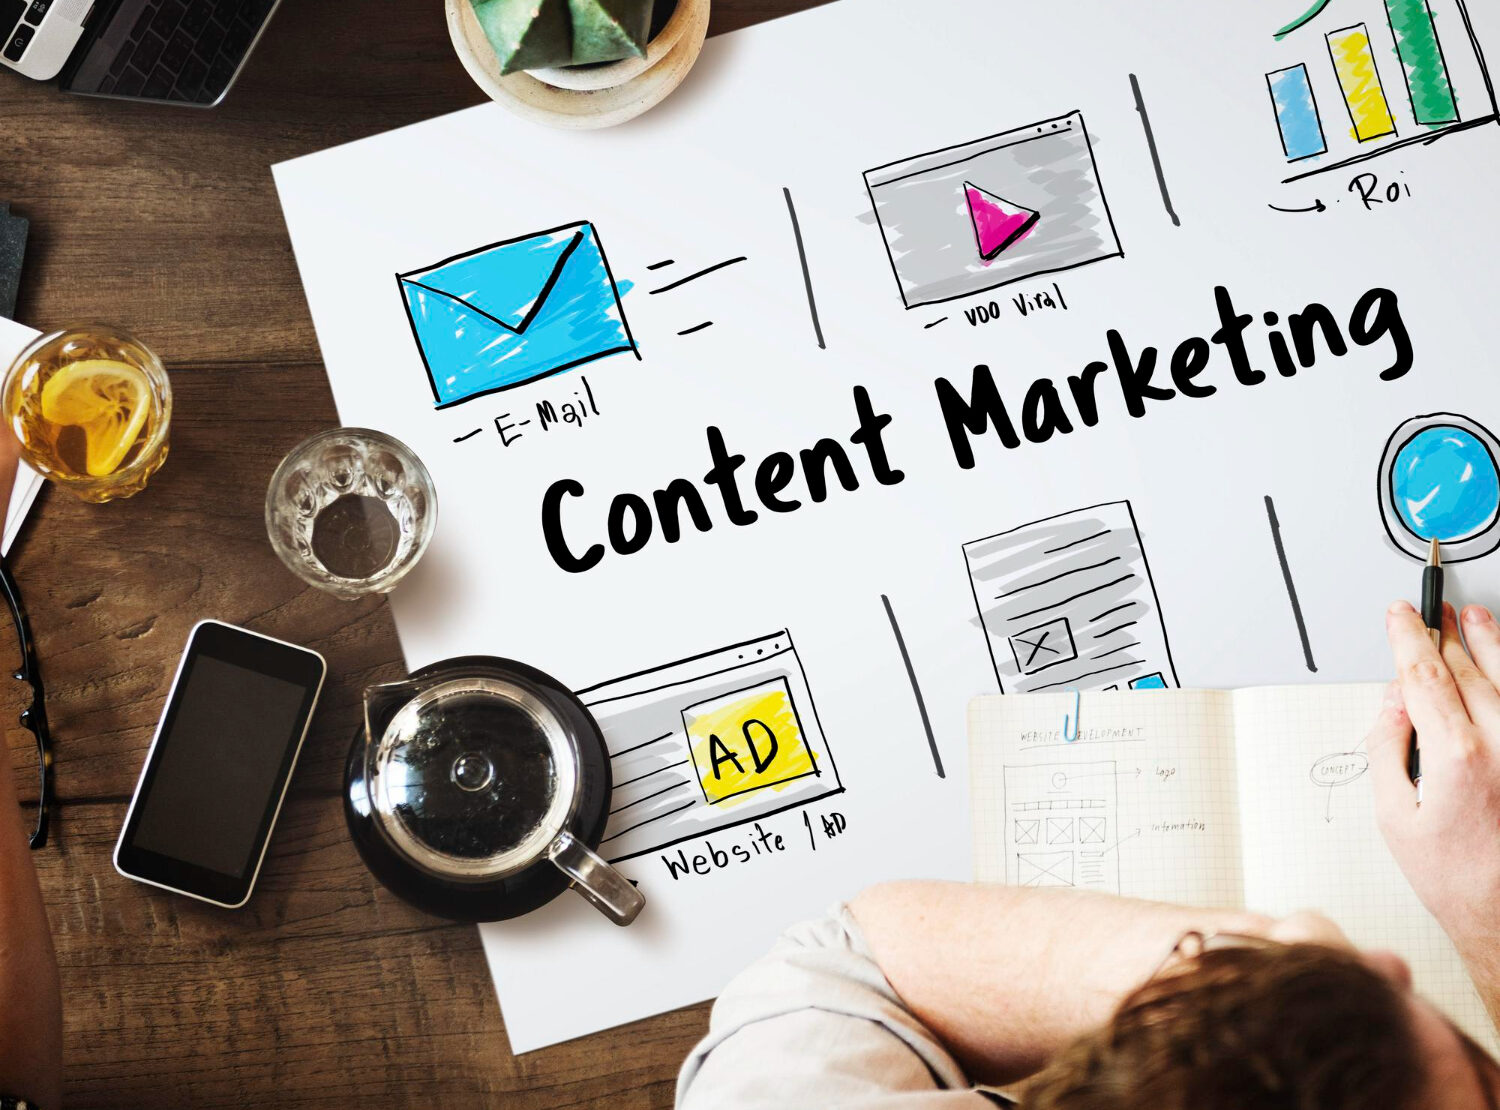 Content Marketing Trends to Watch: Staying Ahead in a Dynamic Landscape